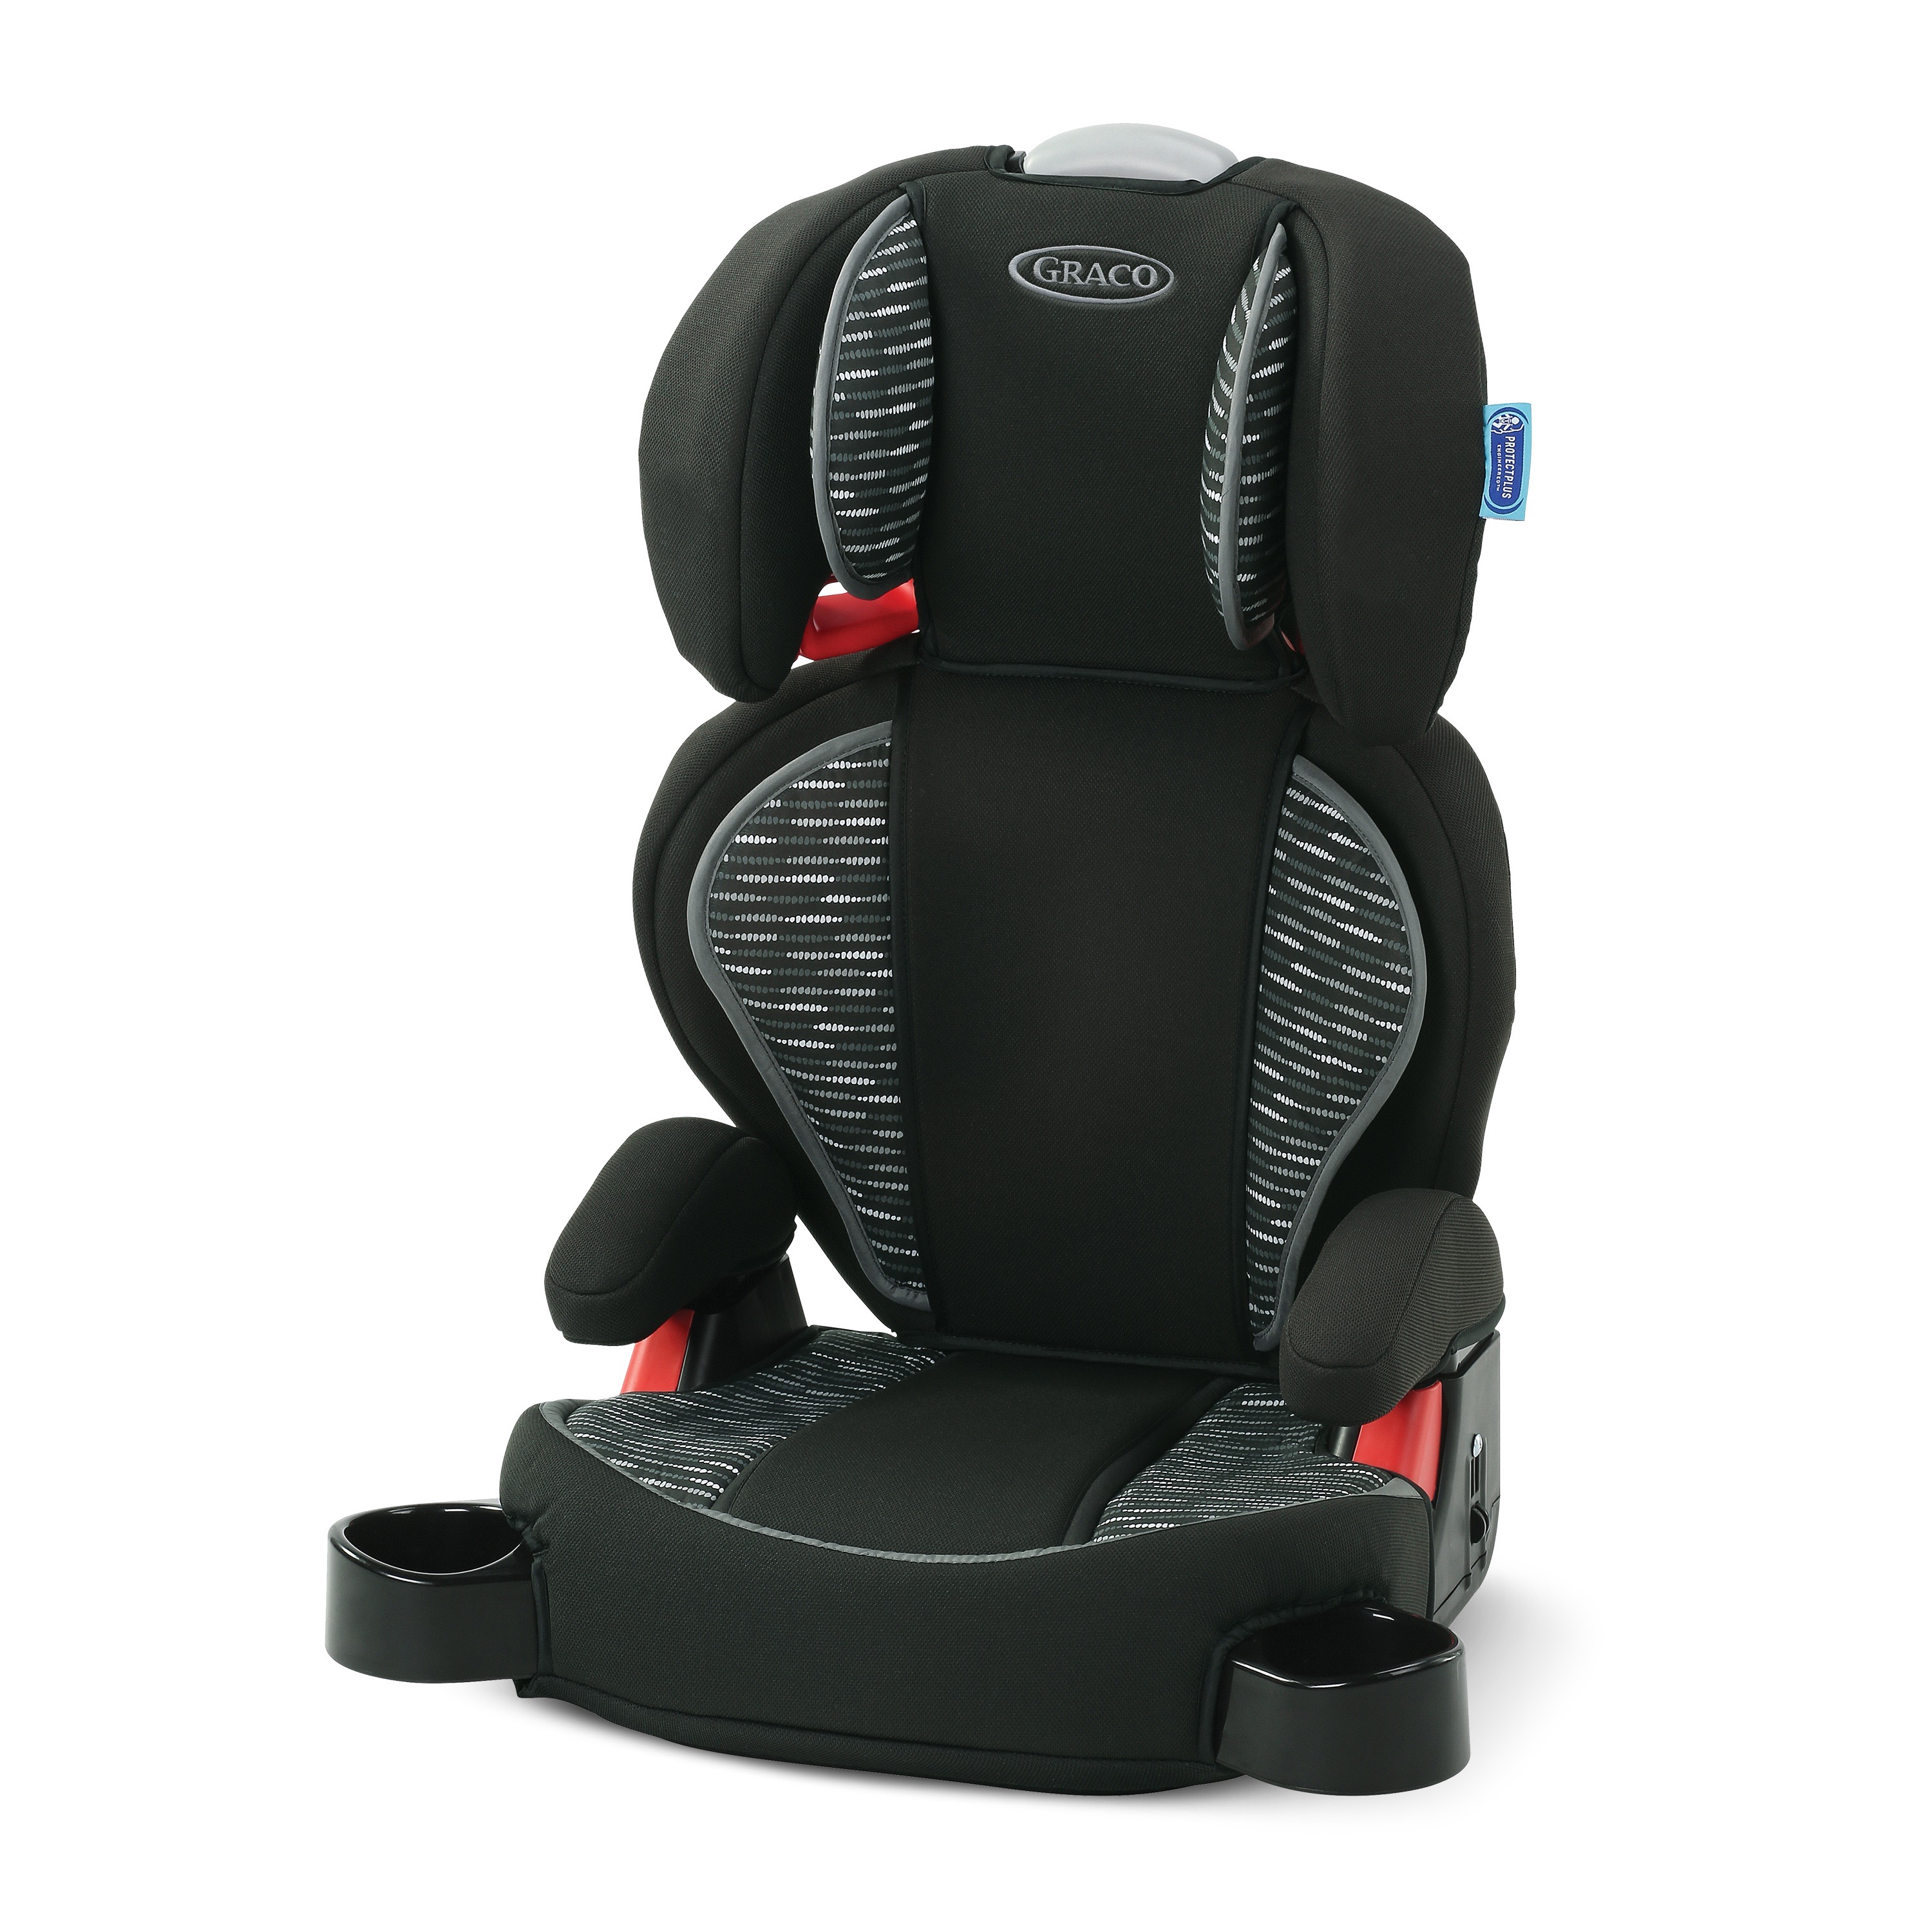 Graco TurboBooster Highback Booster Car Seat, Tamsin